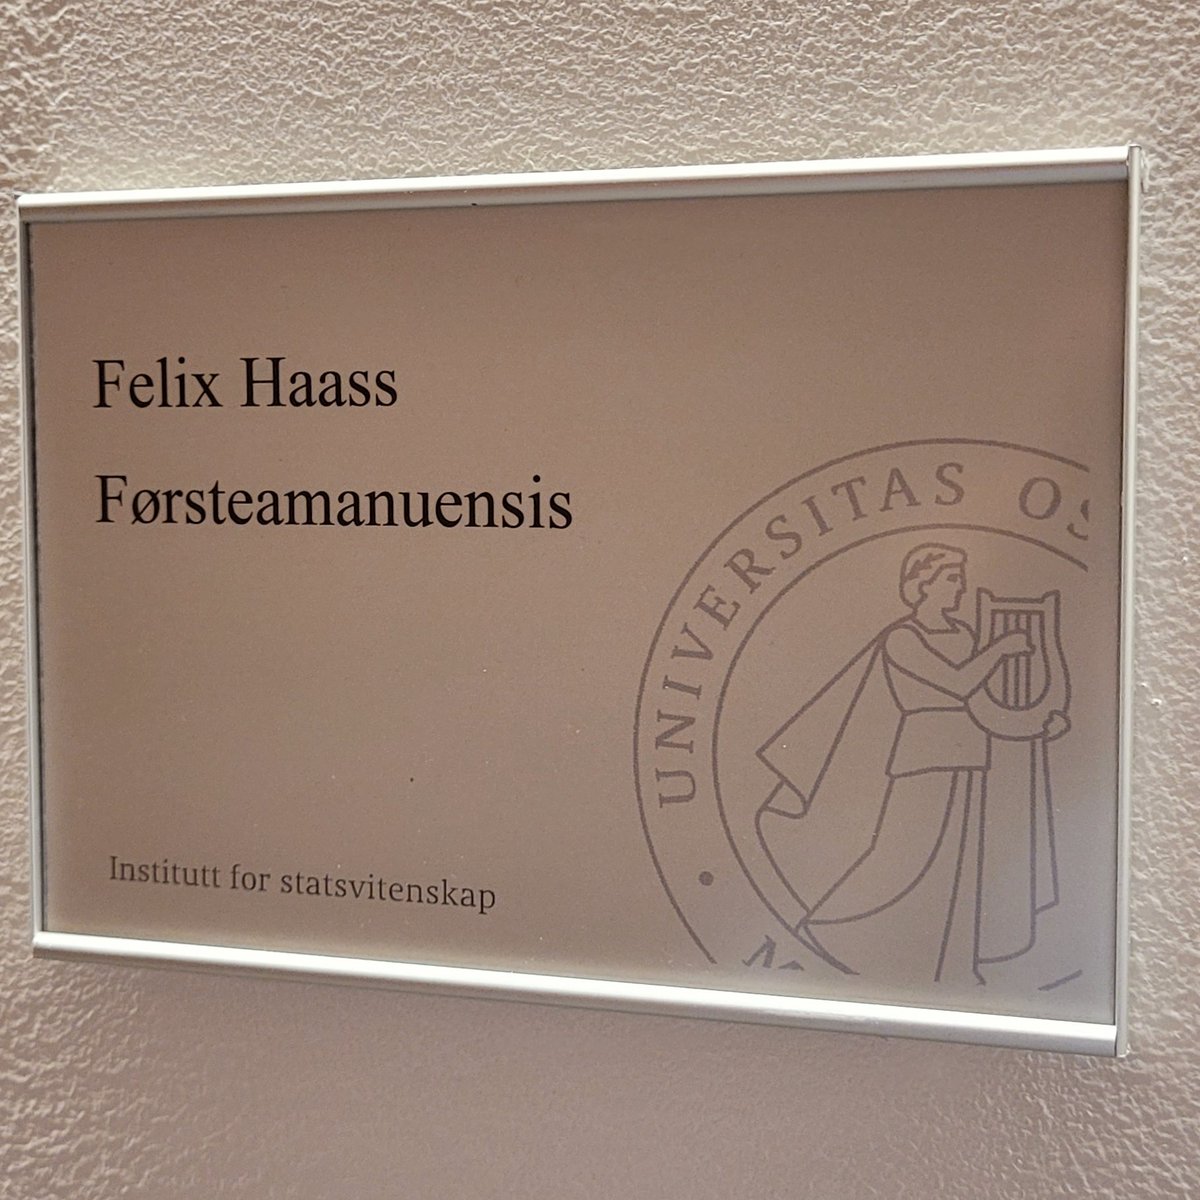 With the start of the new semester, I'm happy to share that my position @UniOslo has officially changed from postdoc to assoc. professor over the summer. I'm very excited that I can continue to research & teach at the fantastic Dep. of Political Science here in beautiful Oslo!🥳